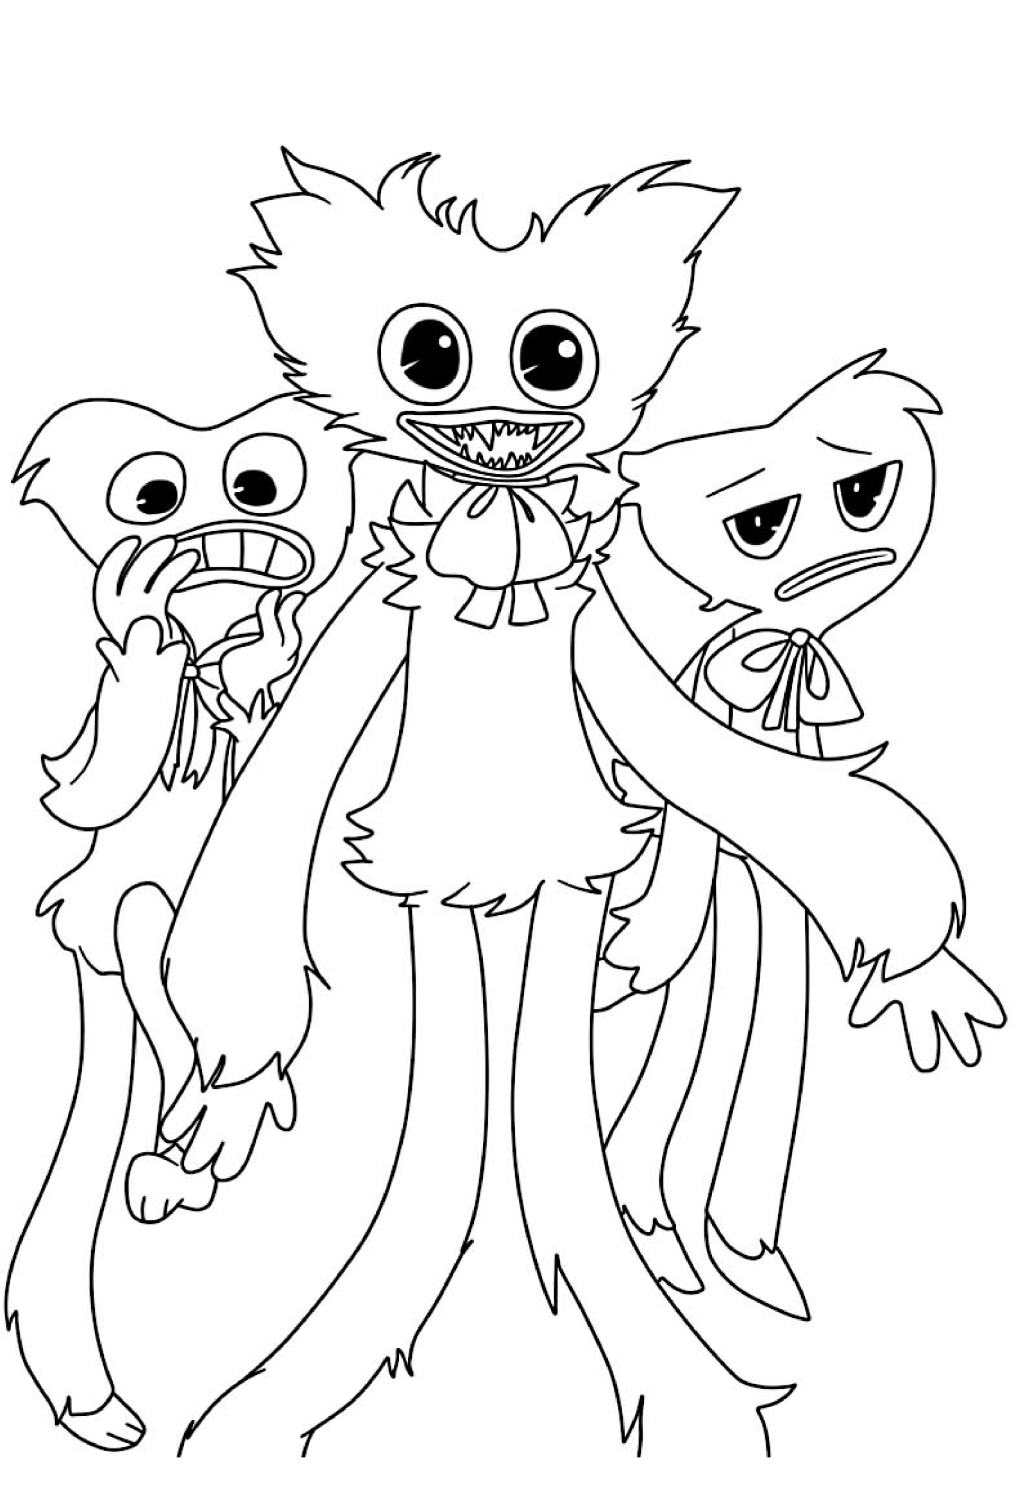 Huggy Wuggy 14 Huggy Wuggy coloring page to print and coloring